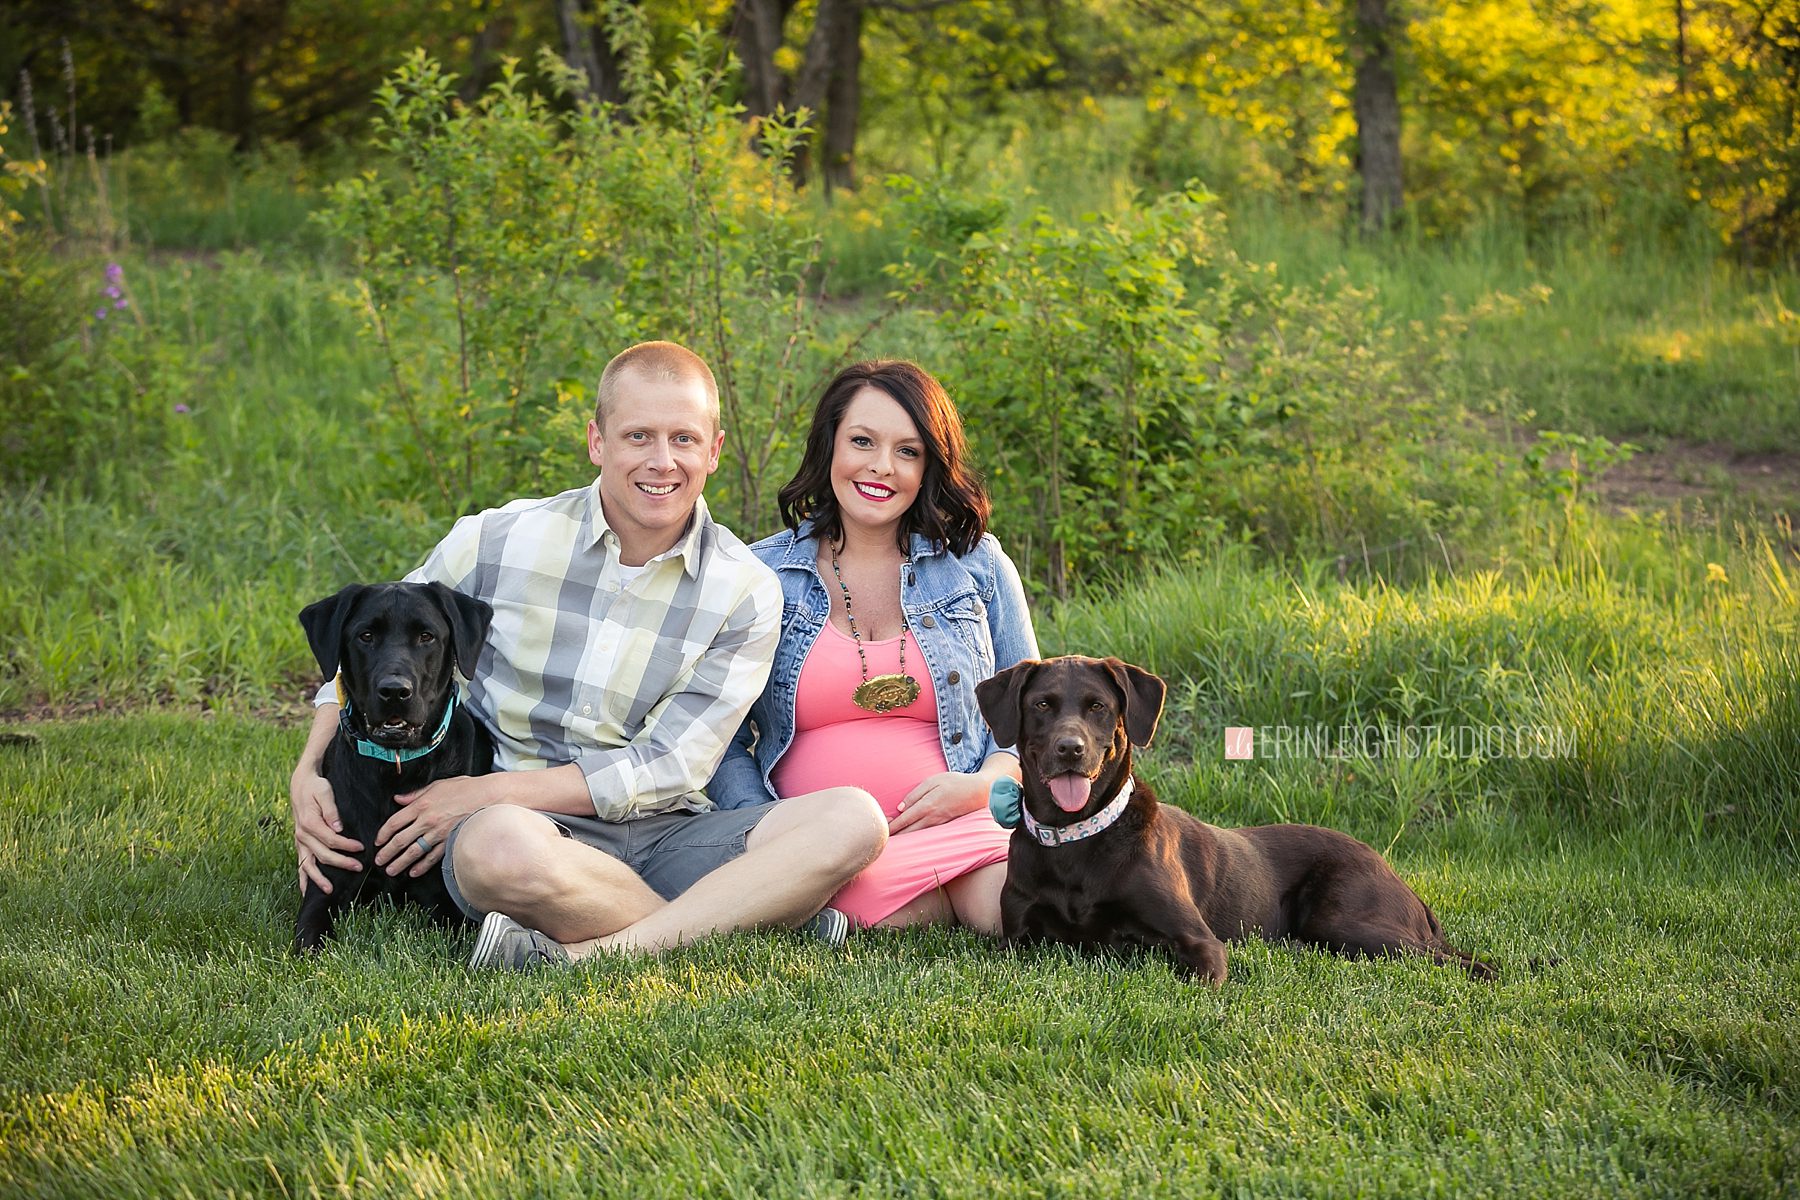 Maternity photos with dogs